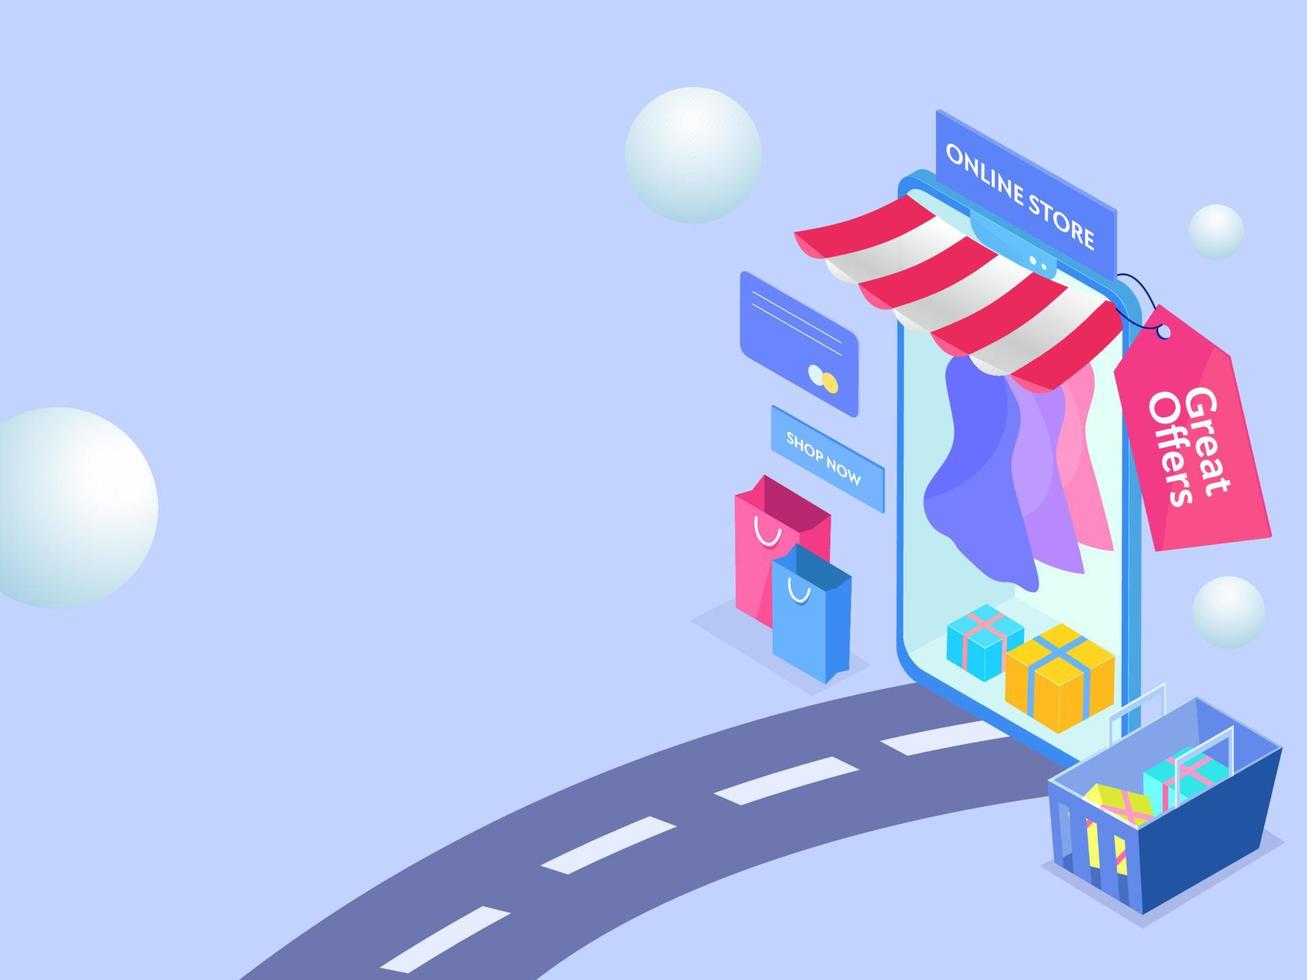 Isometric Illustration of Online Store in Smartphone with Great Offers Tag, Female Dresses, Carrying Bags, Full Basket of Gift Box and Payment Card on Blue Background. vector